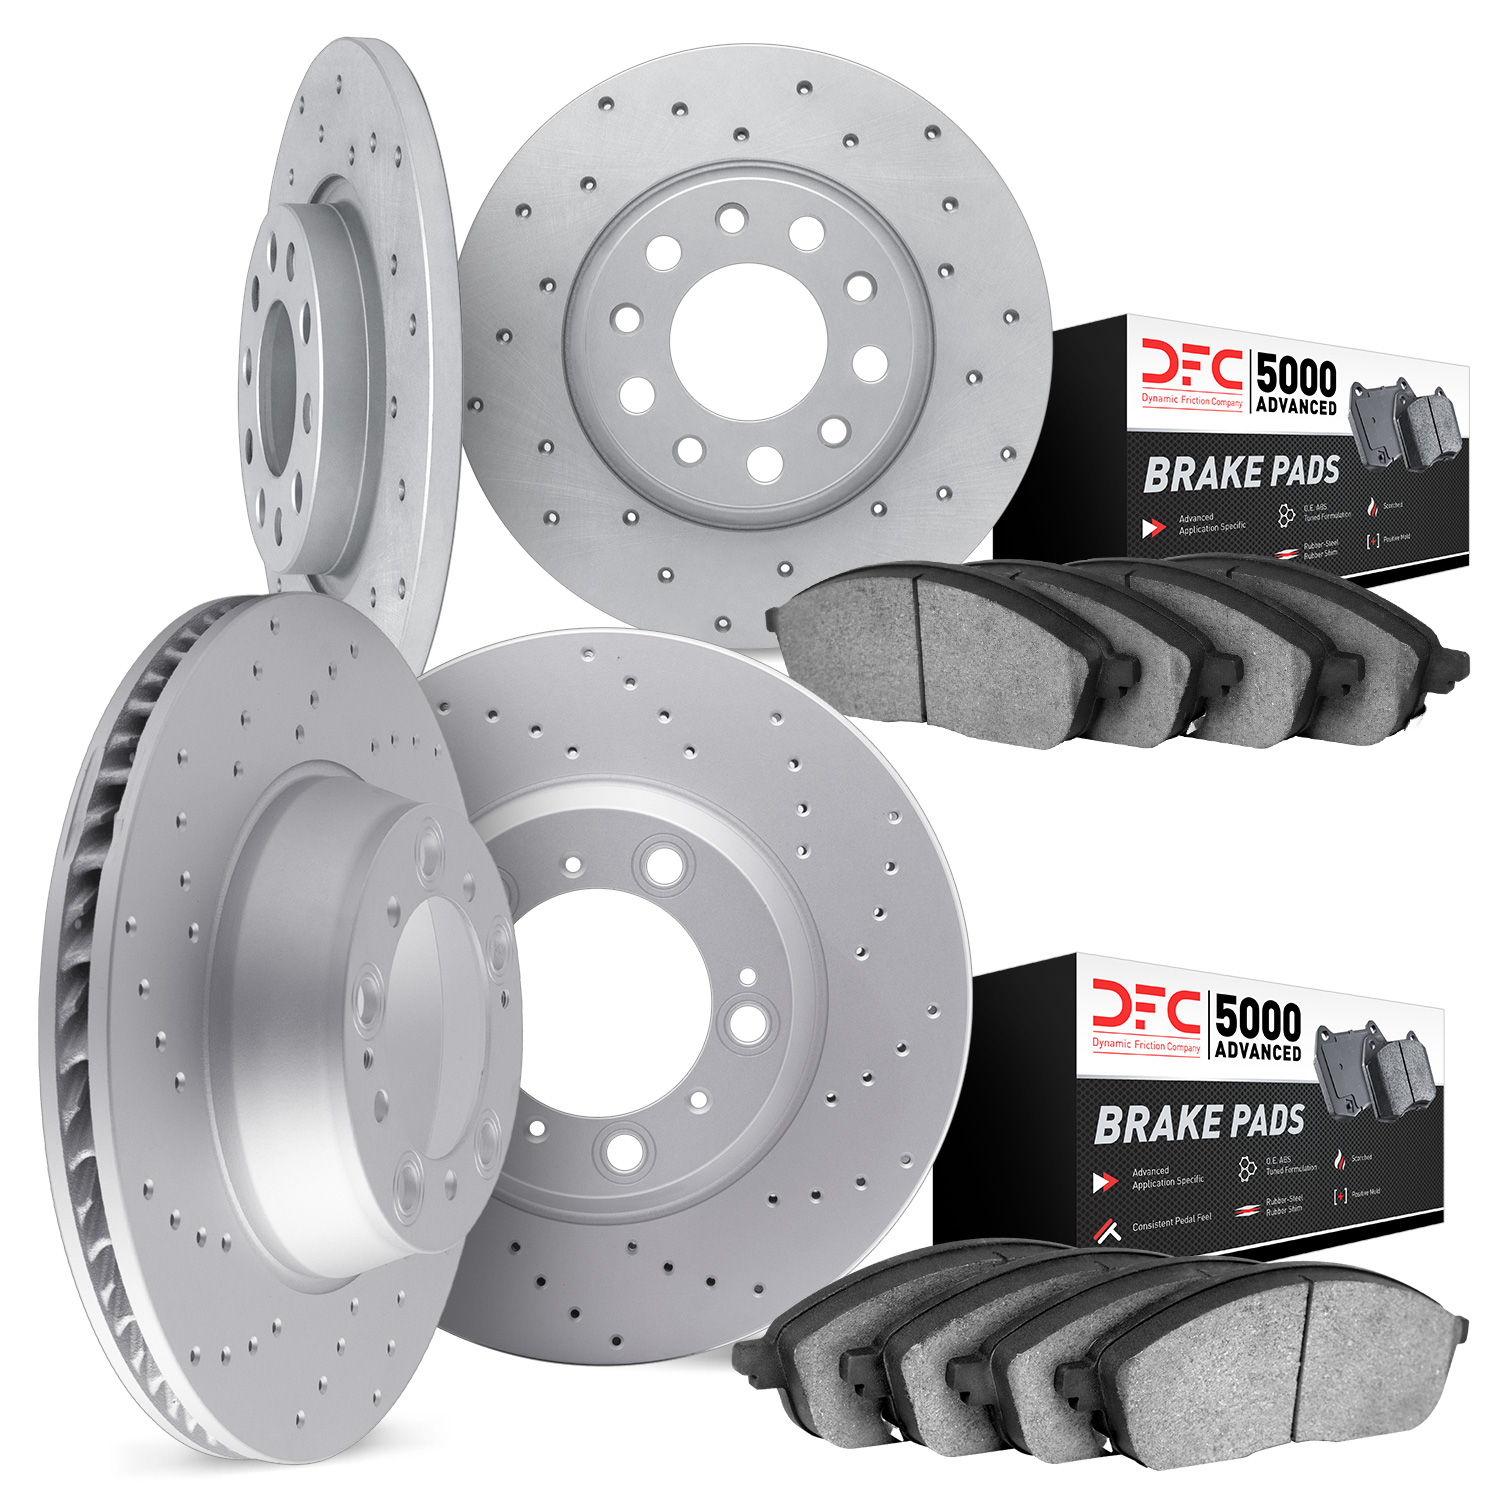 2704-59031 Geoperformance Drilled Brake Rotors with Active Performance Pads Kit, 2013-2015 Acura/Honda, Position: Front and Rear